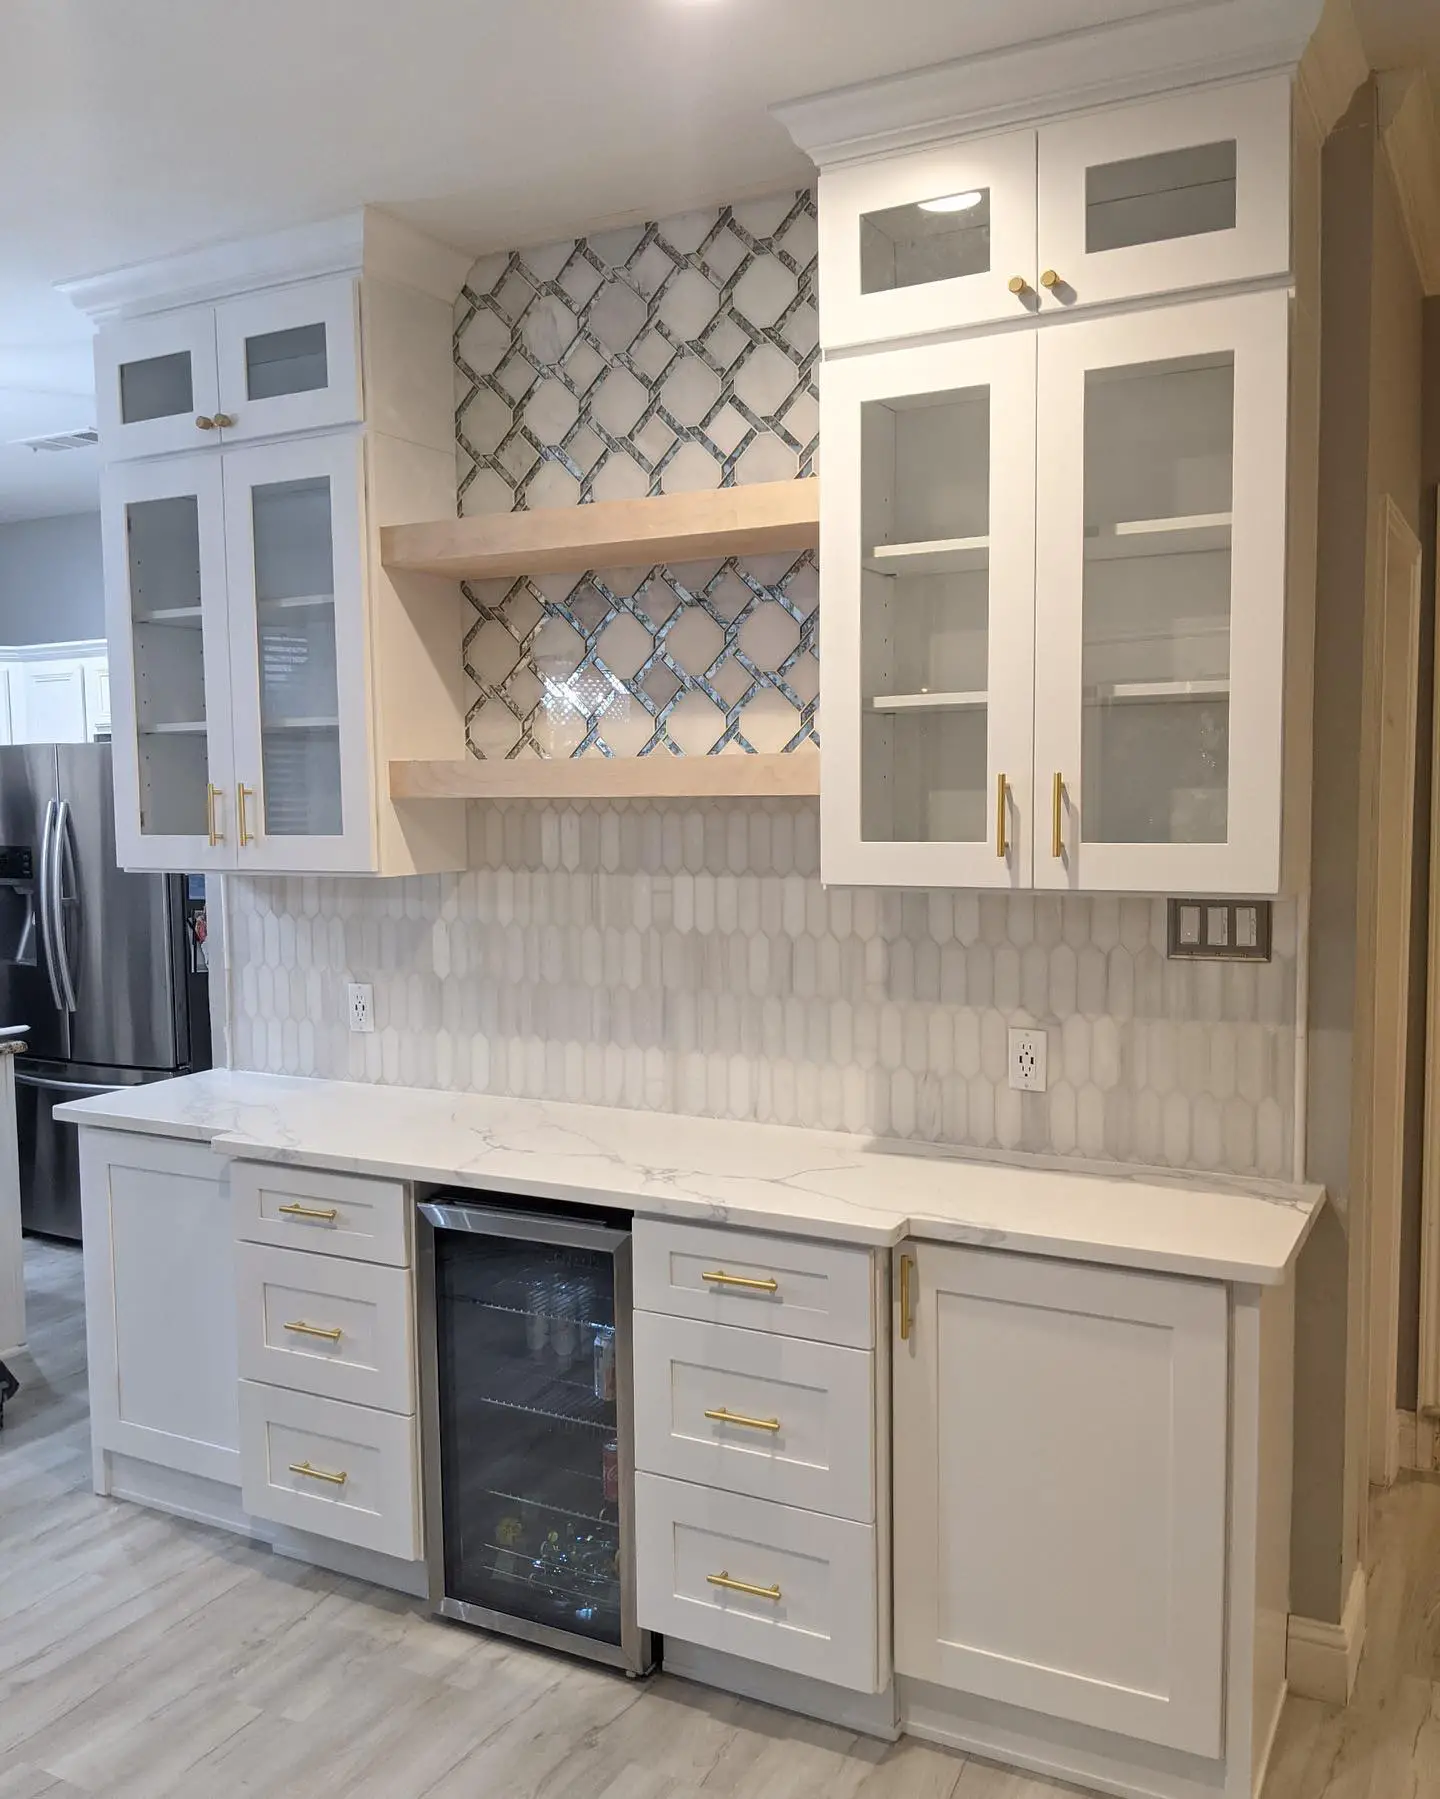 A kitchen with white cabinets and a refrigerator.